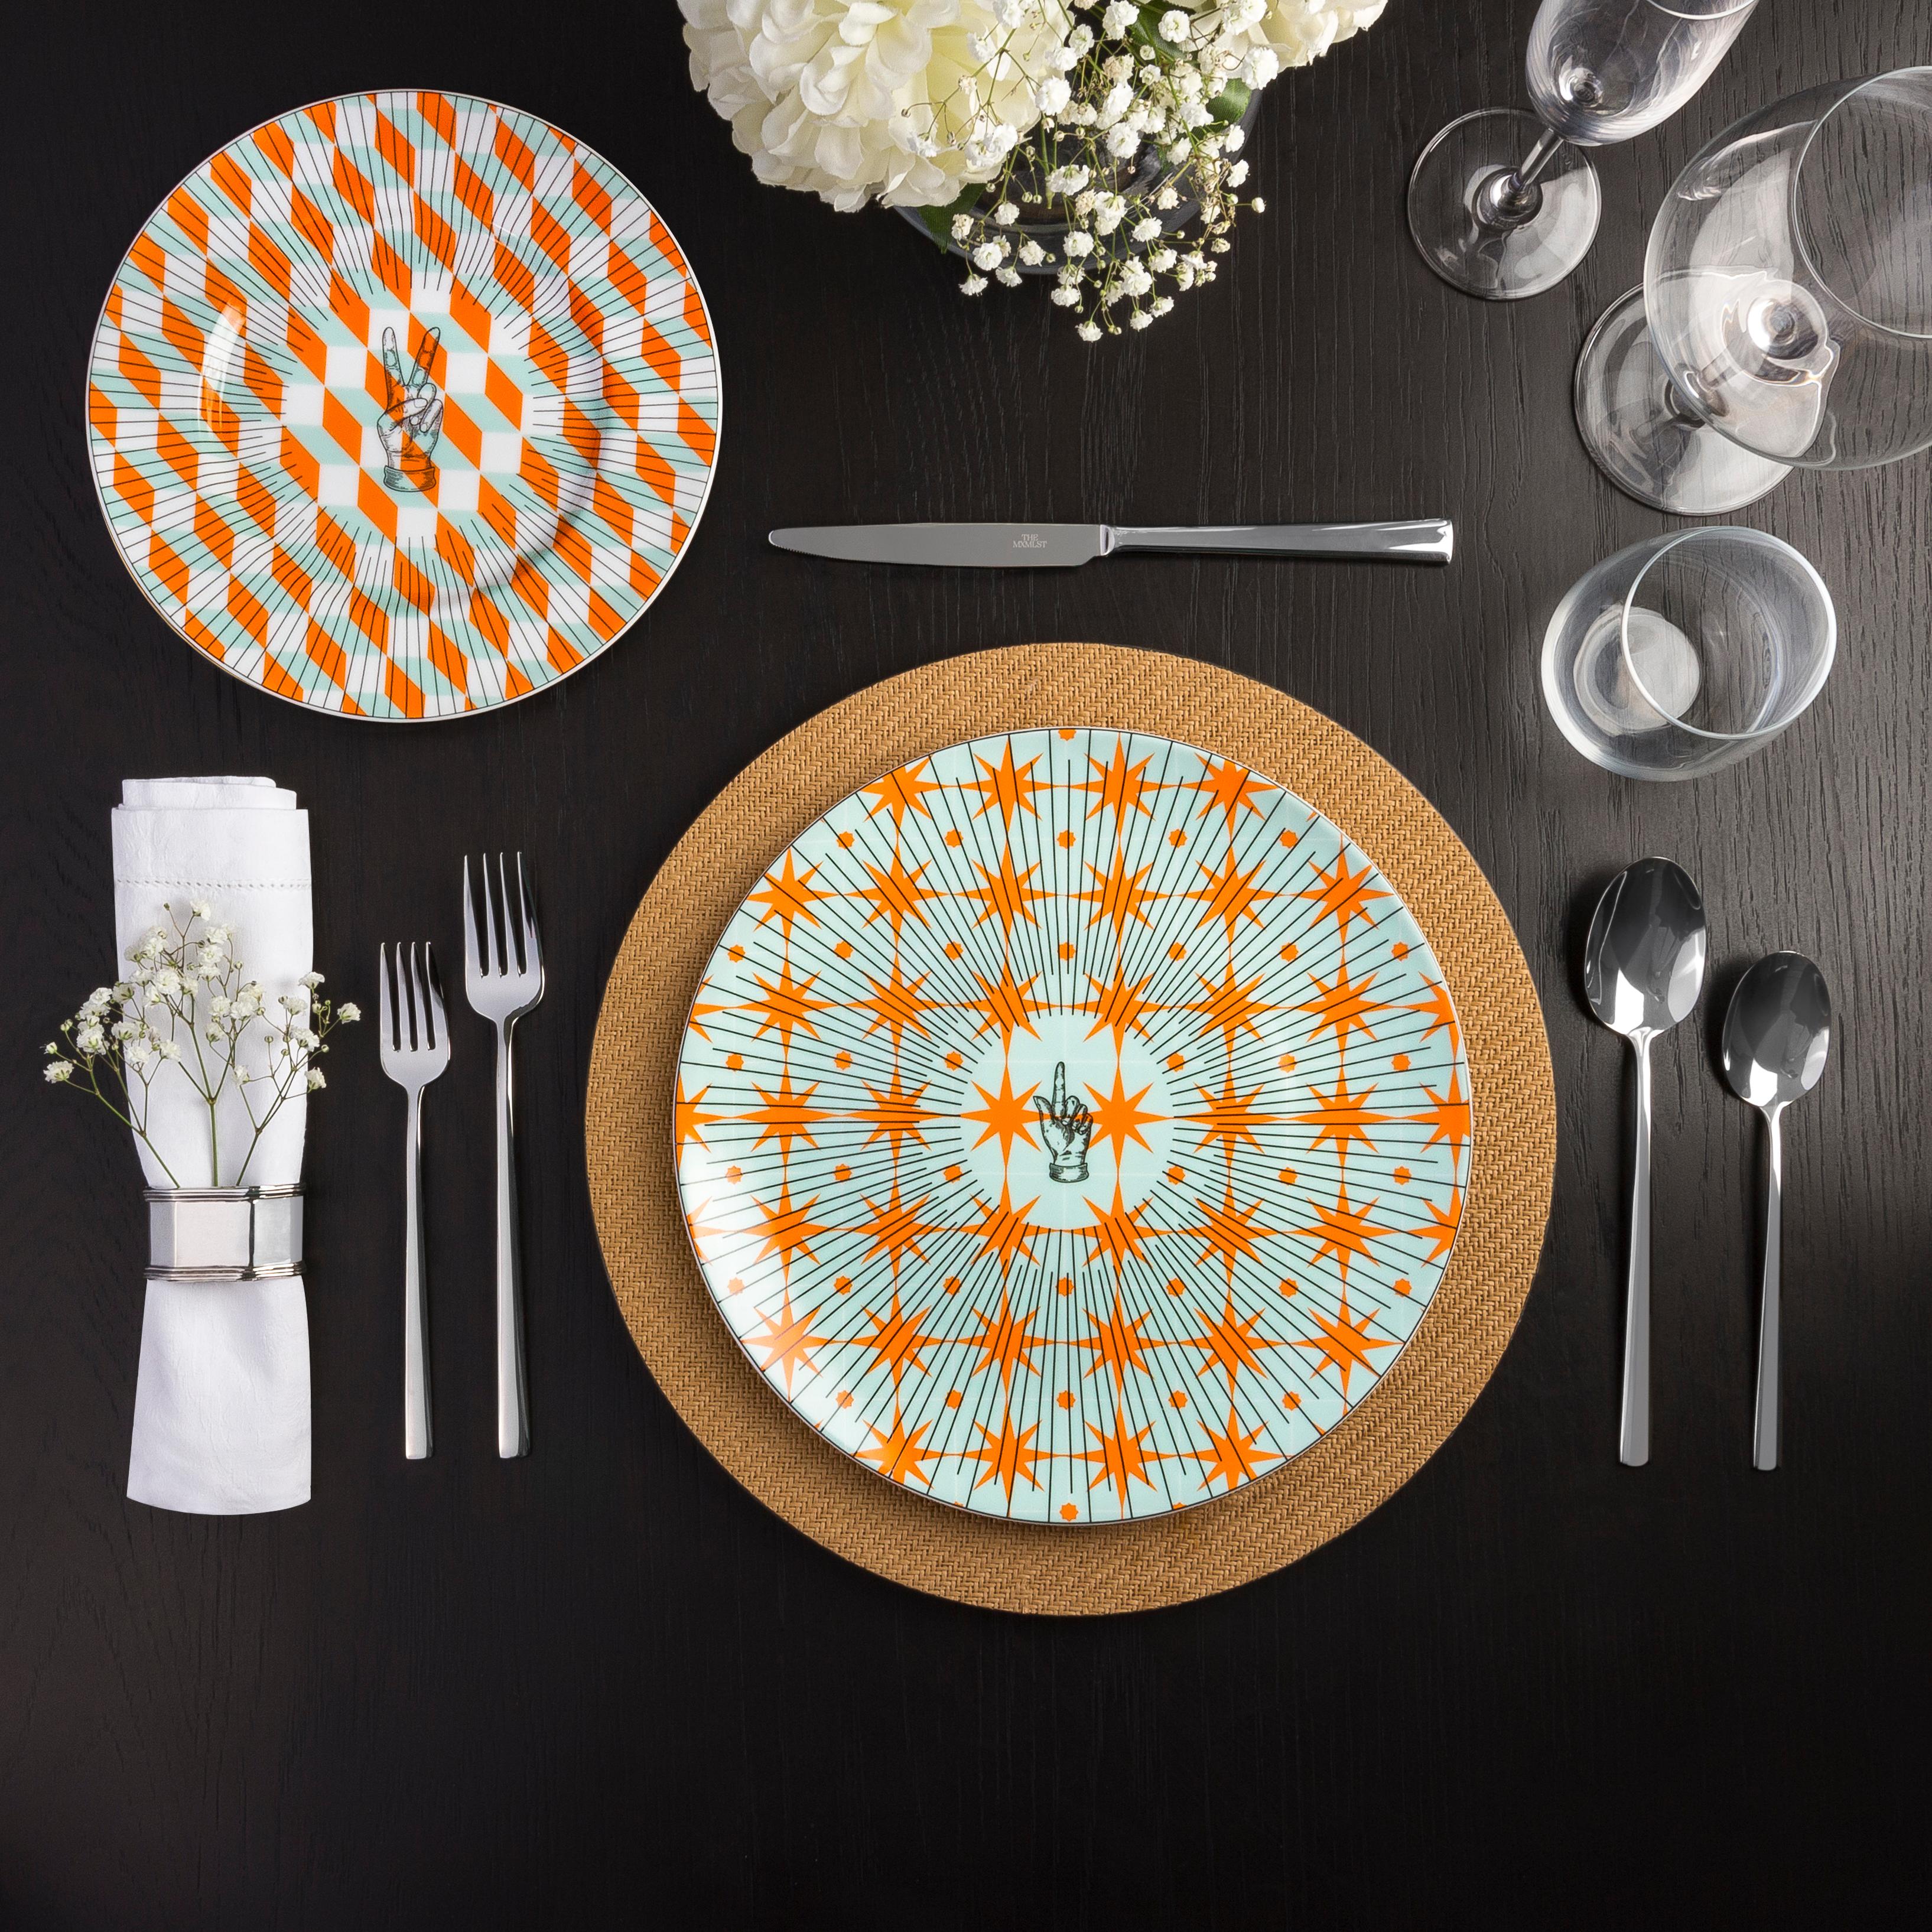 Inspired by the geometric patterns featured in Portuguese tiles, the Les Clément Dinner Set will add a layer of cool-ness to your dinner table. Dynamic black lines that lead up to the hand motifs bring a sense of playfulness that will surely